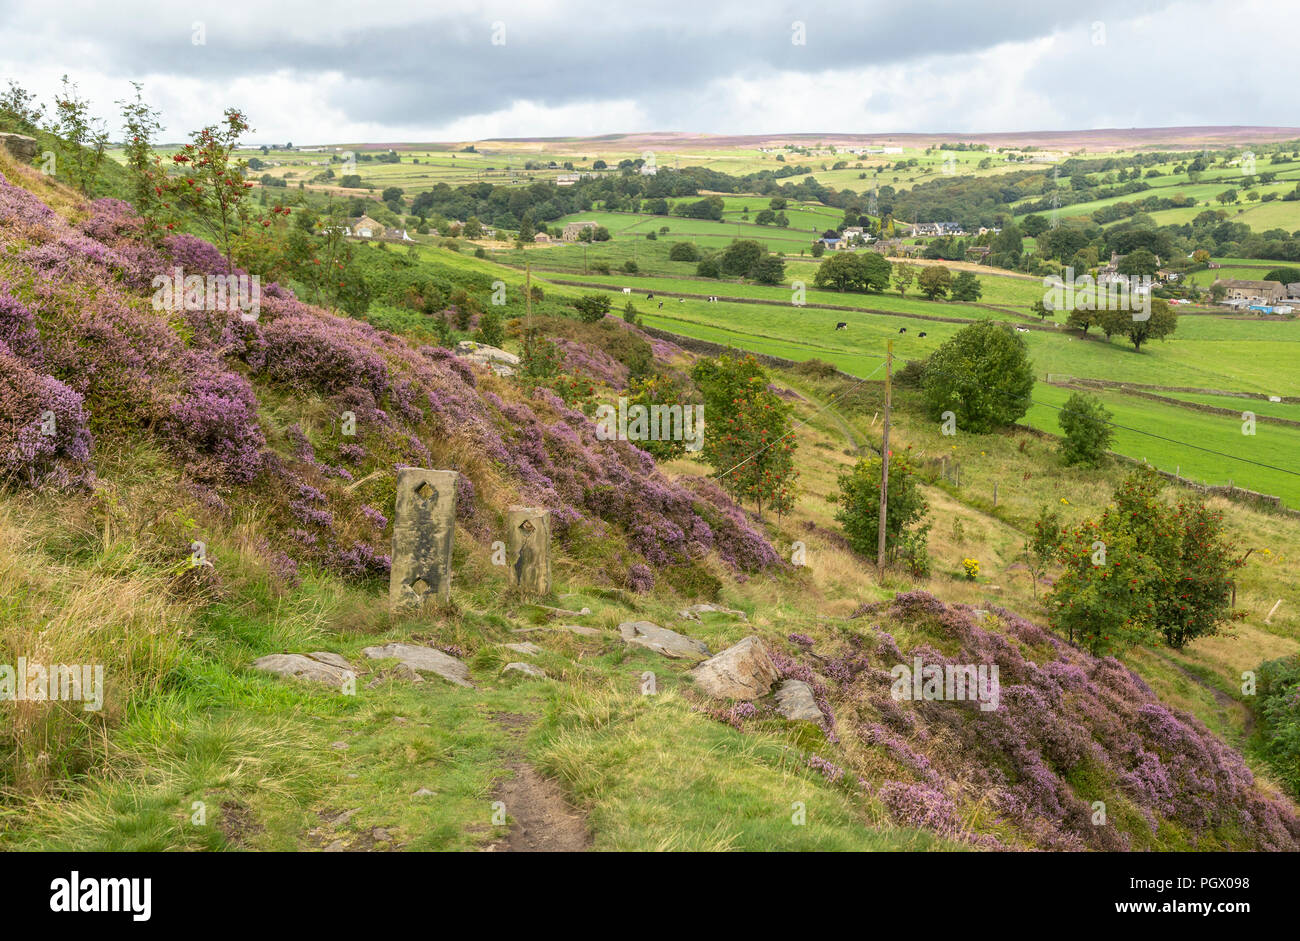 A Yorkshire landscape showing moorland heather and long distant views. Taken in Baildon, Yorkshire, England. Stock Photo